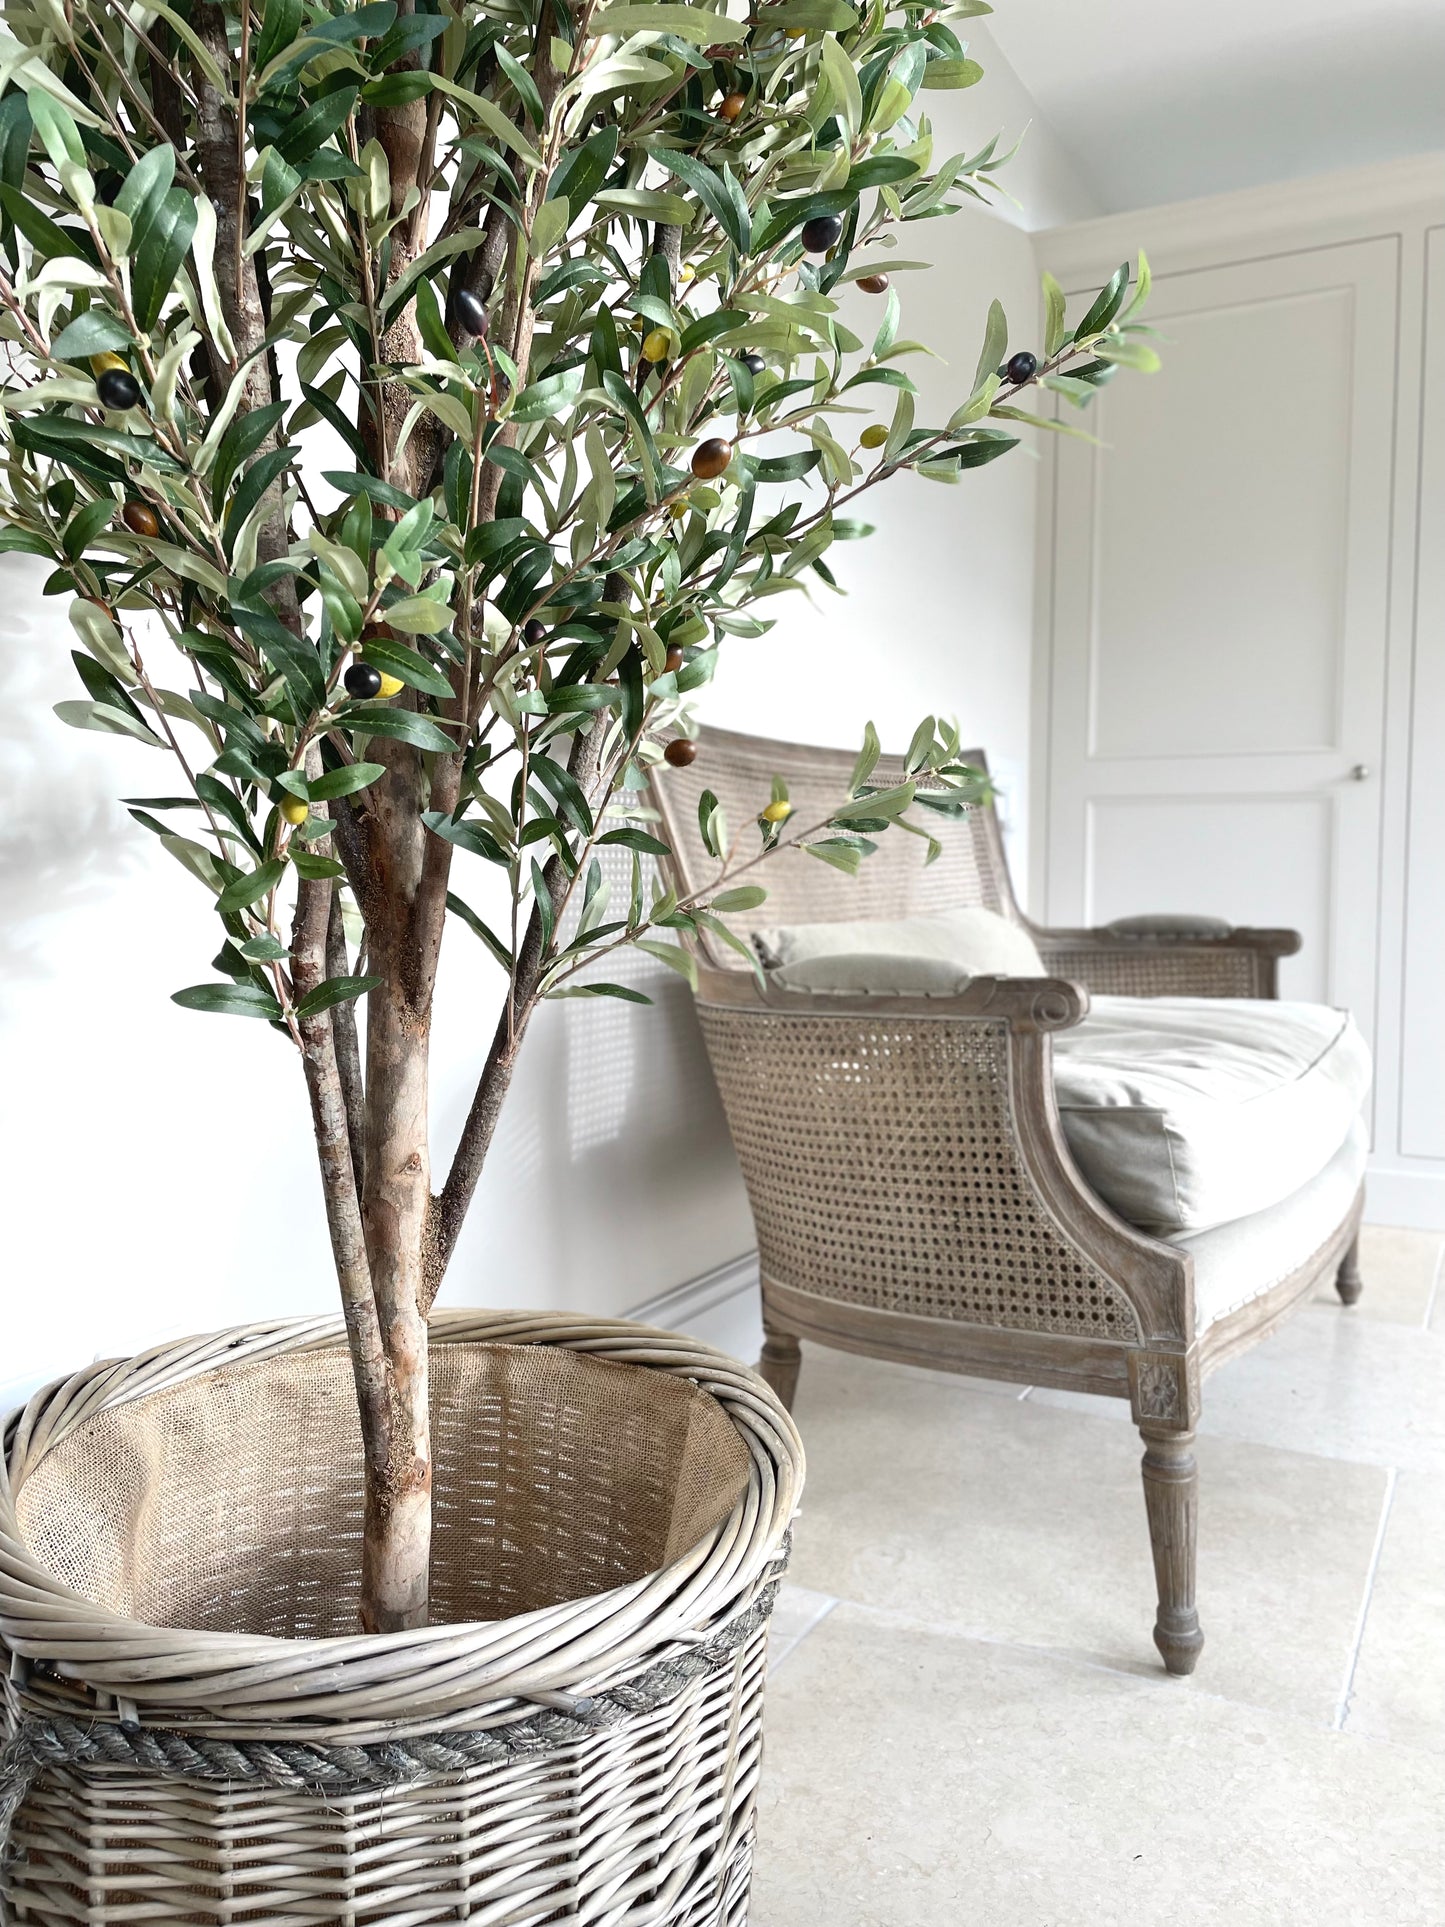 Faux Olive Tree - Extra Large 170cm - Pre Order Expected December / Early January